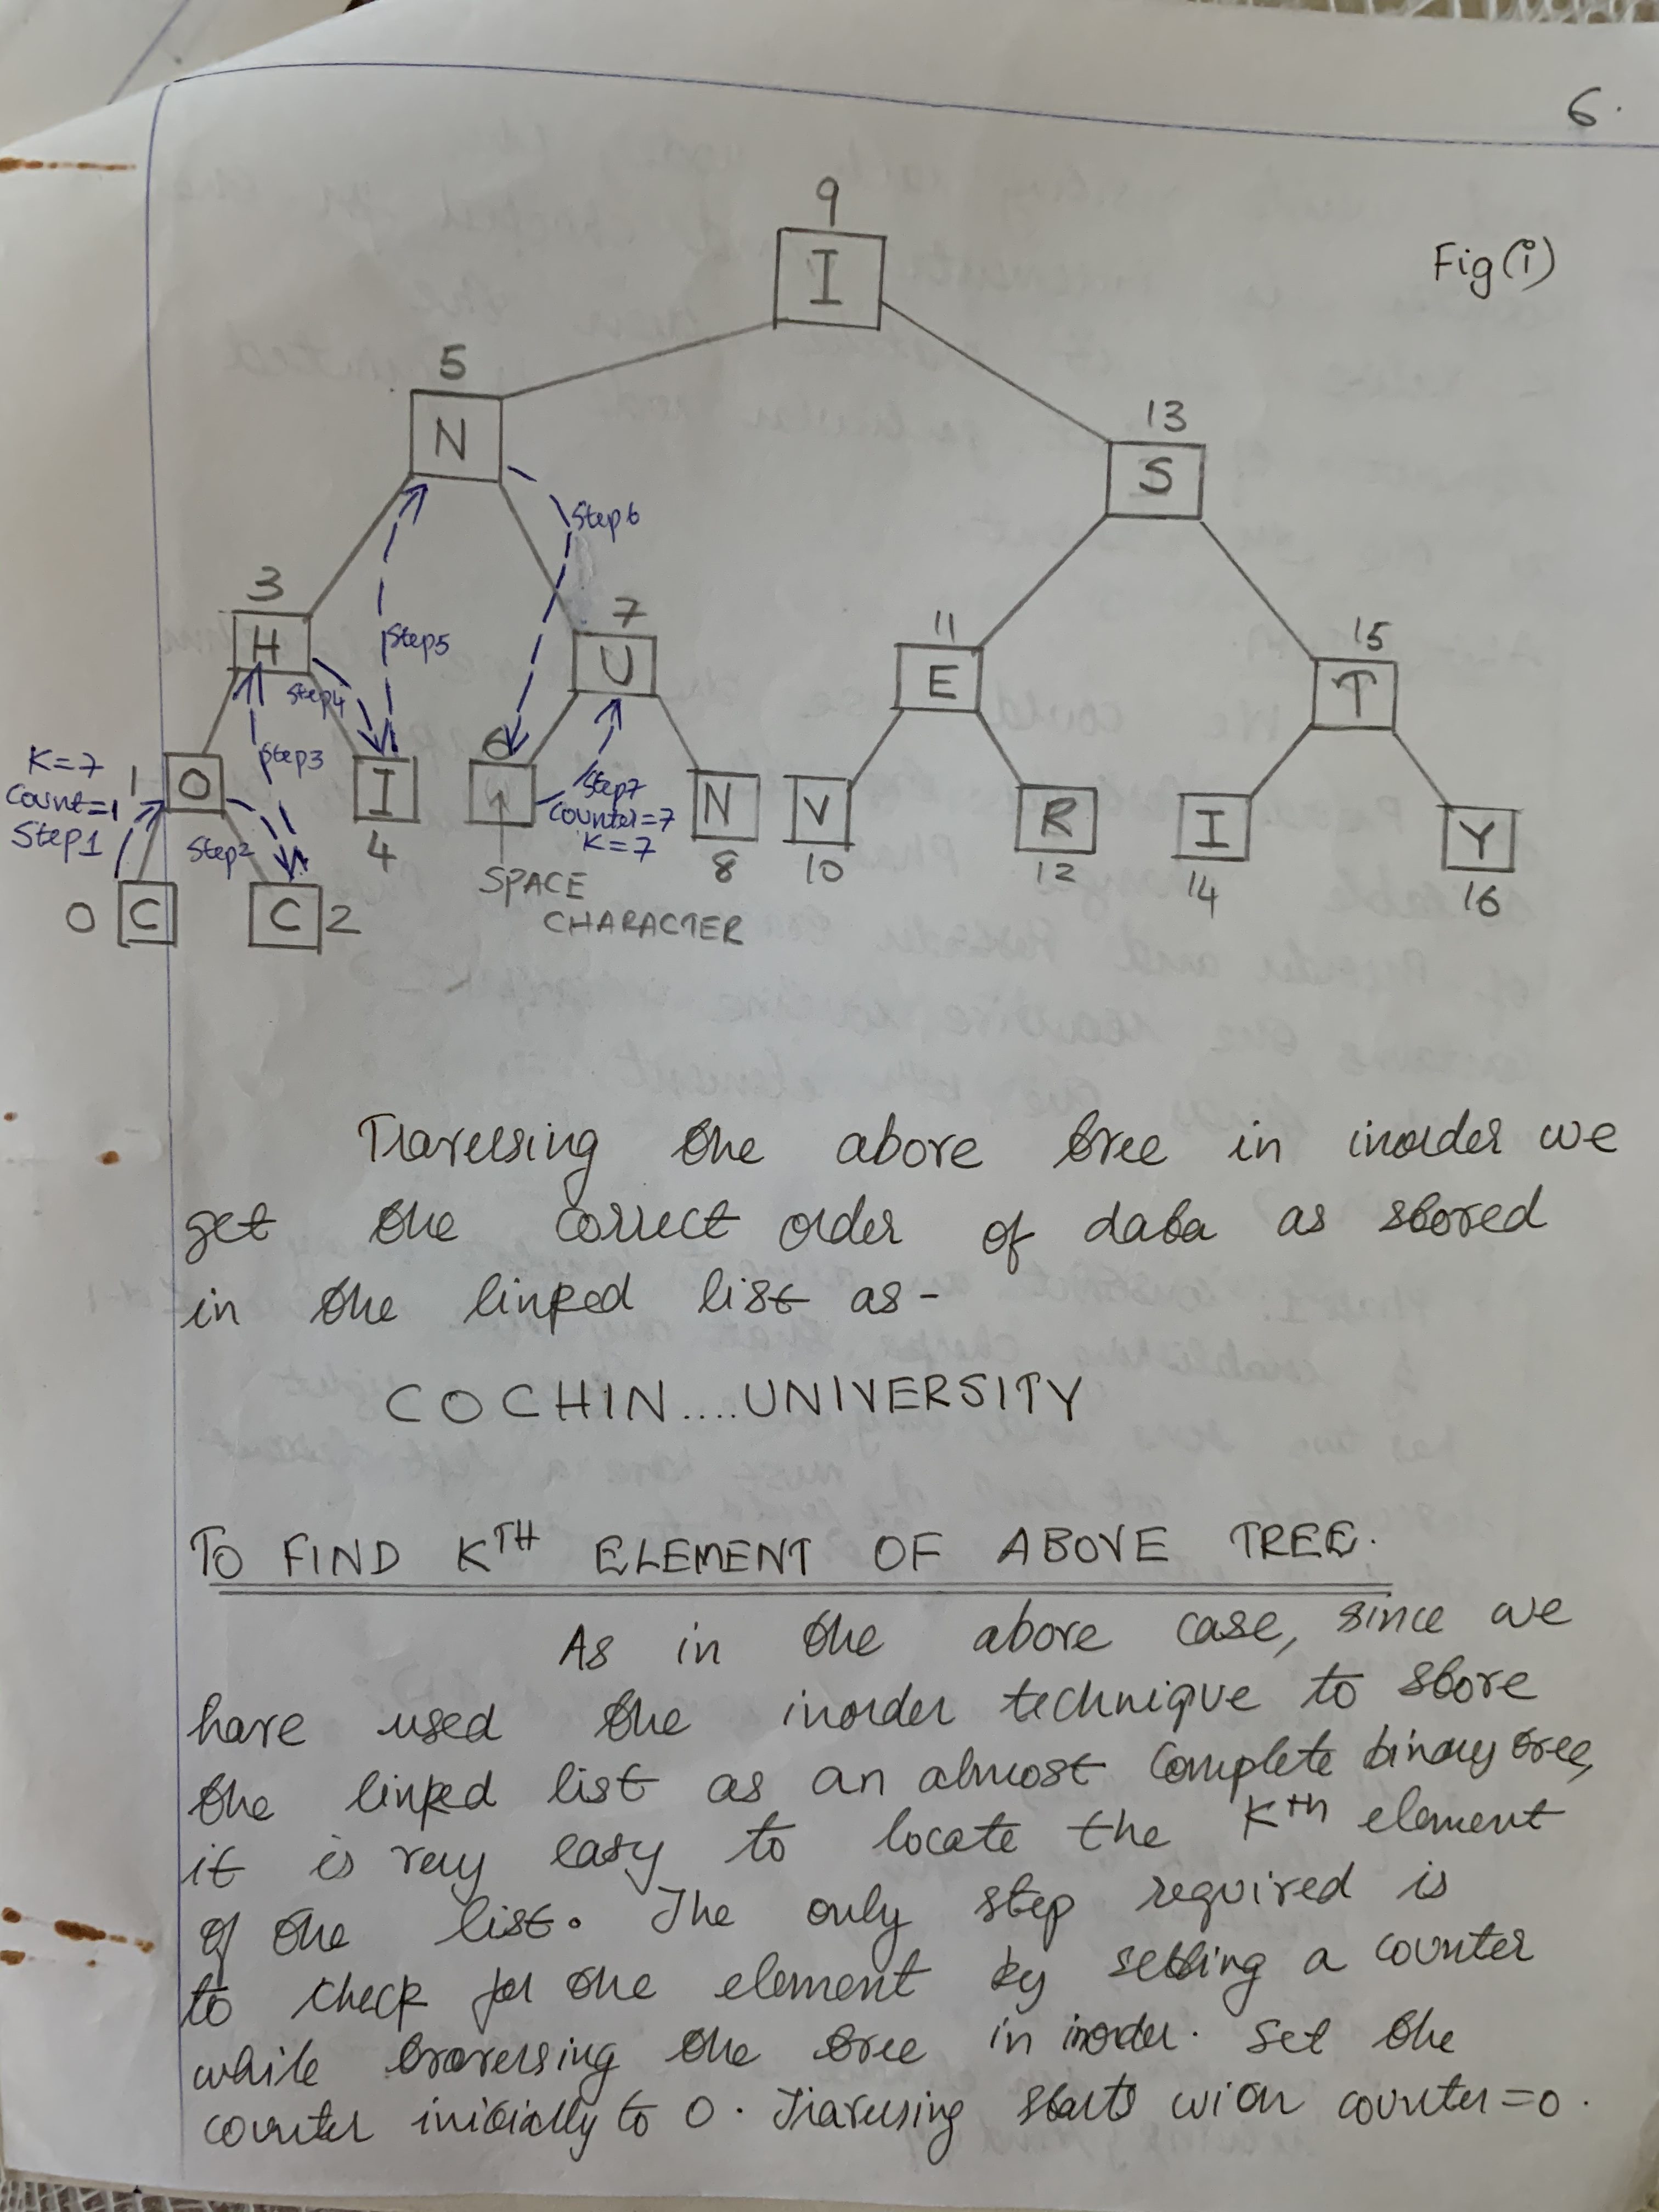 Linked list as an almost complete binary tree